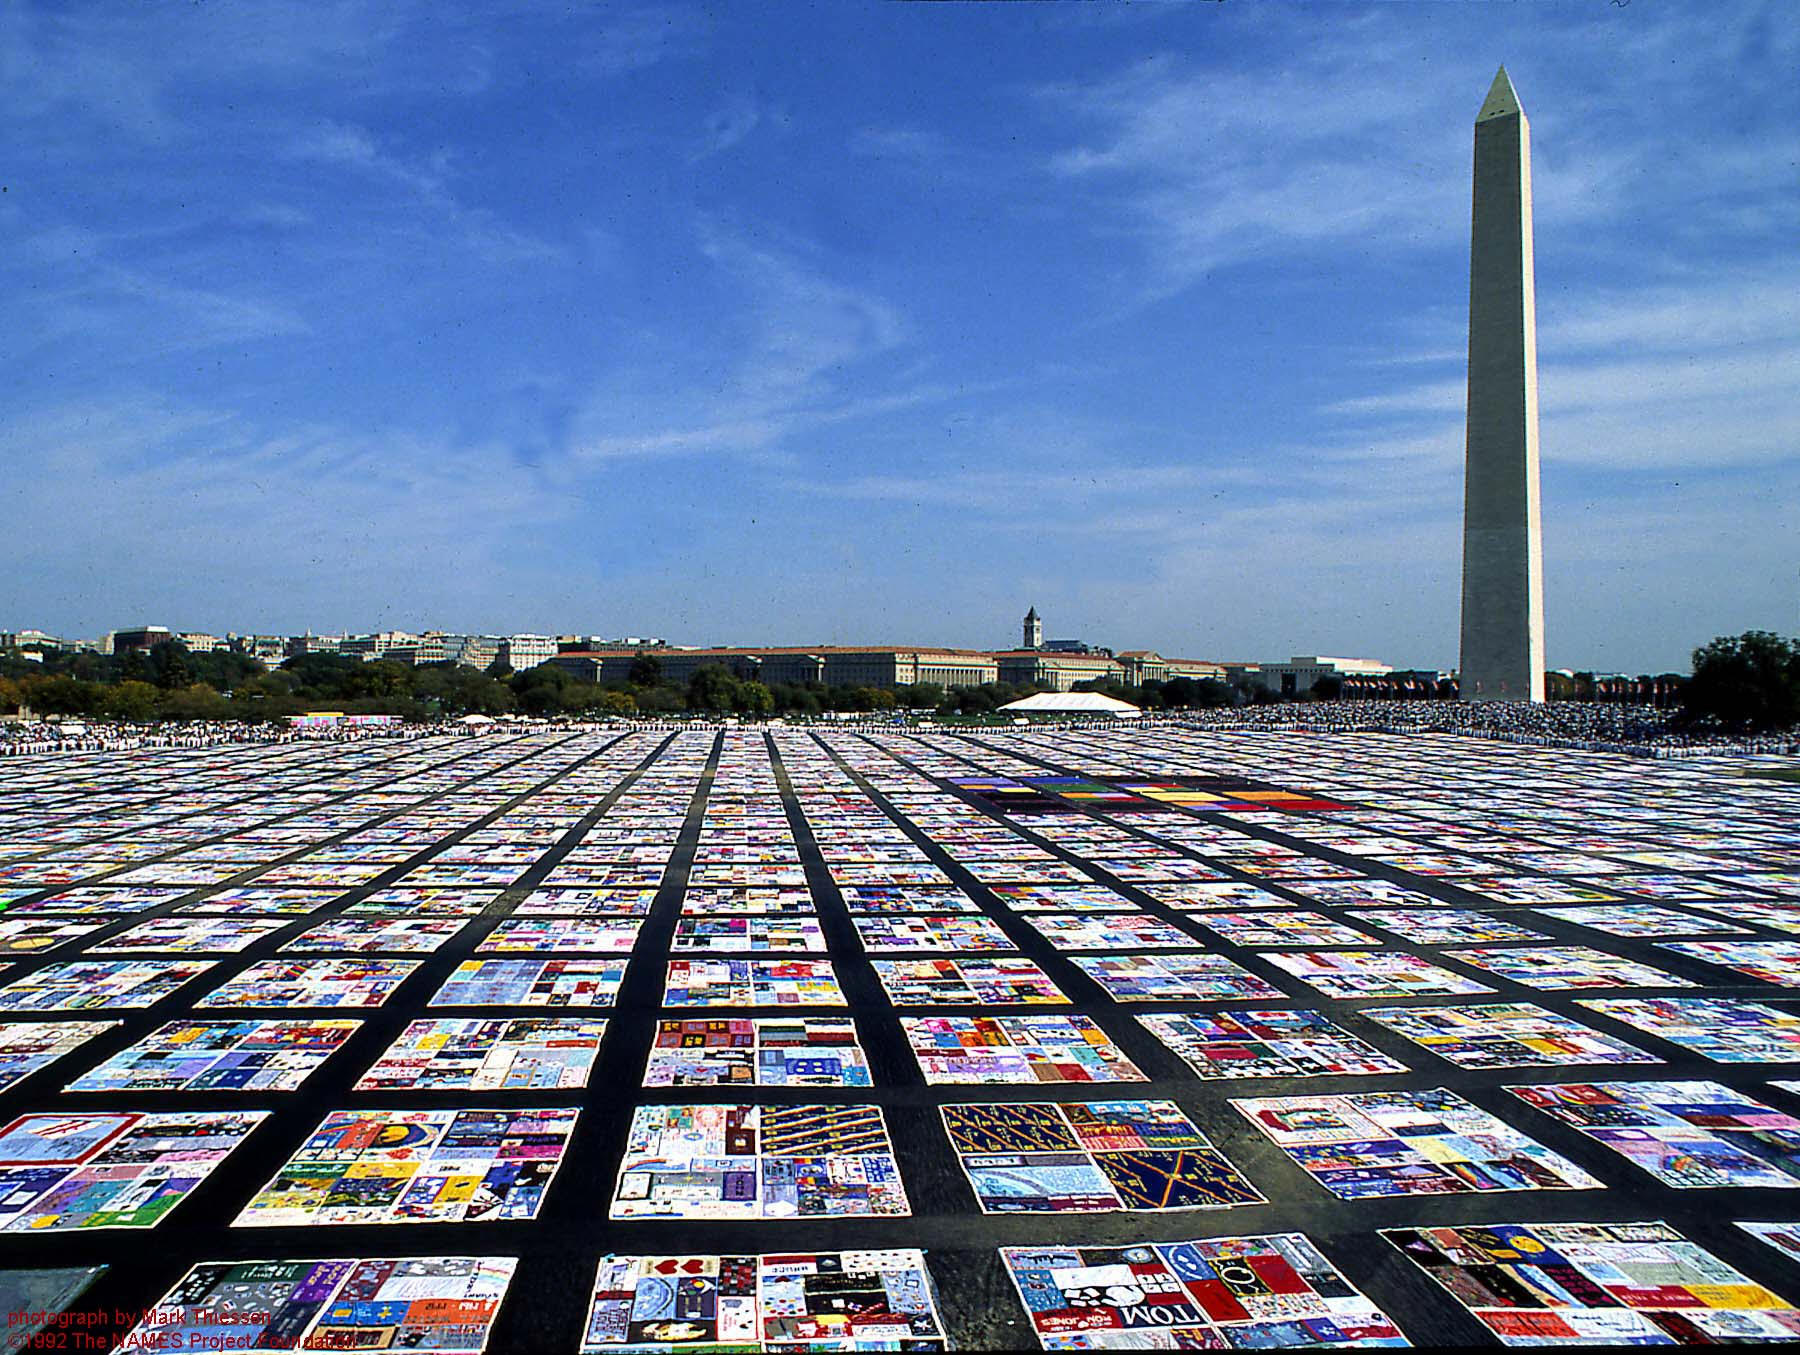 The AIDS Memorial Quilt on the National Mall in Washington, D.C. in 1987.